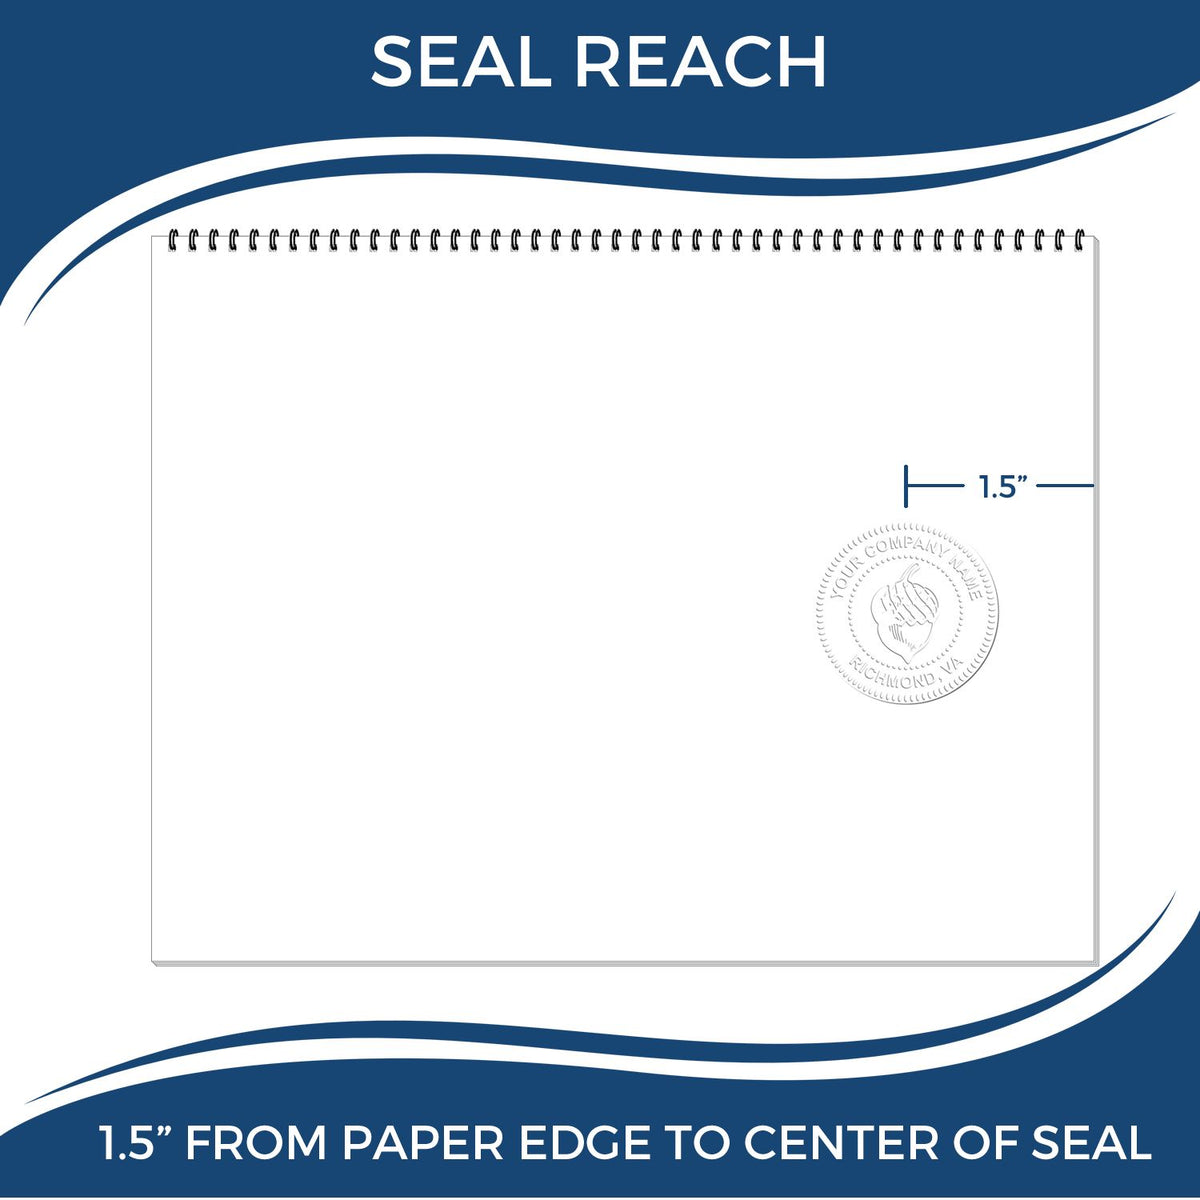 An infographic showing the seal reach which is represented by a ruler and a miniature seal image of the Iowa Desk Surveyor Seal Embosser